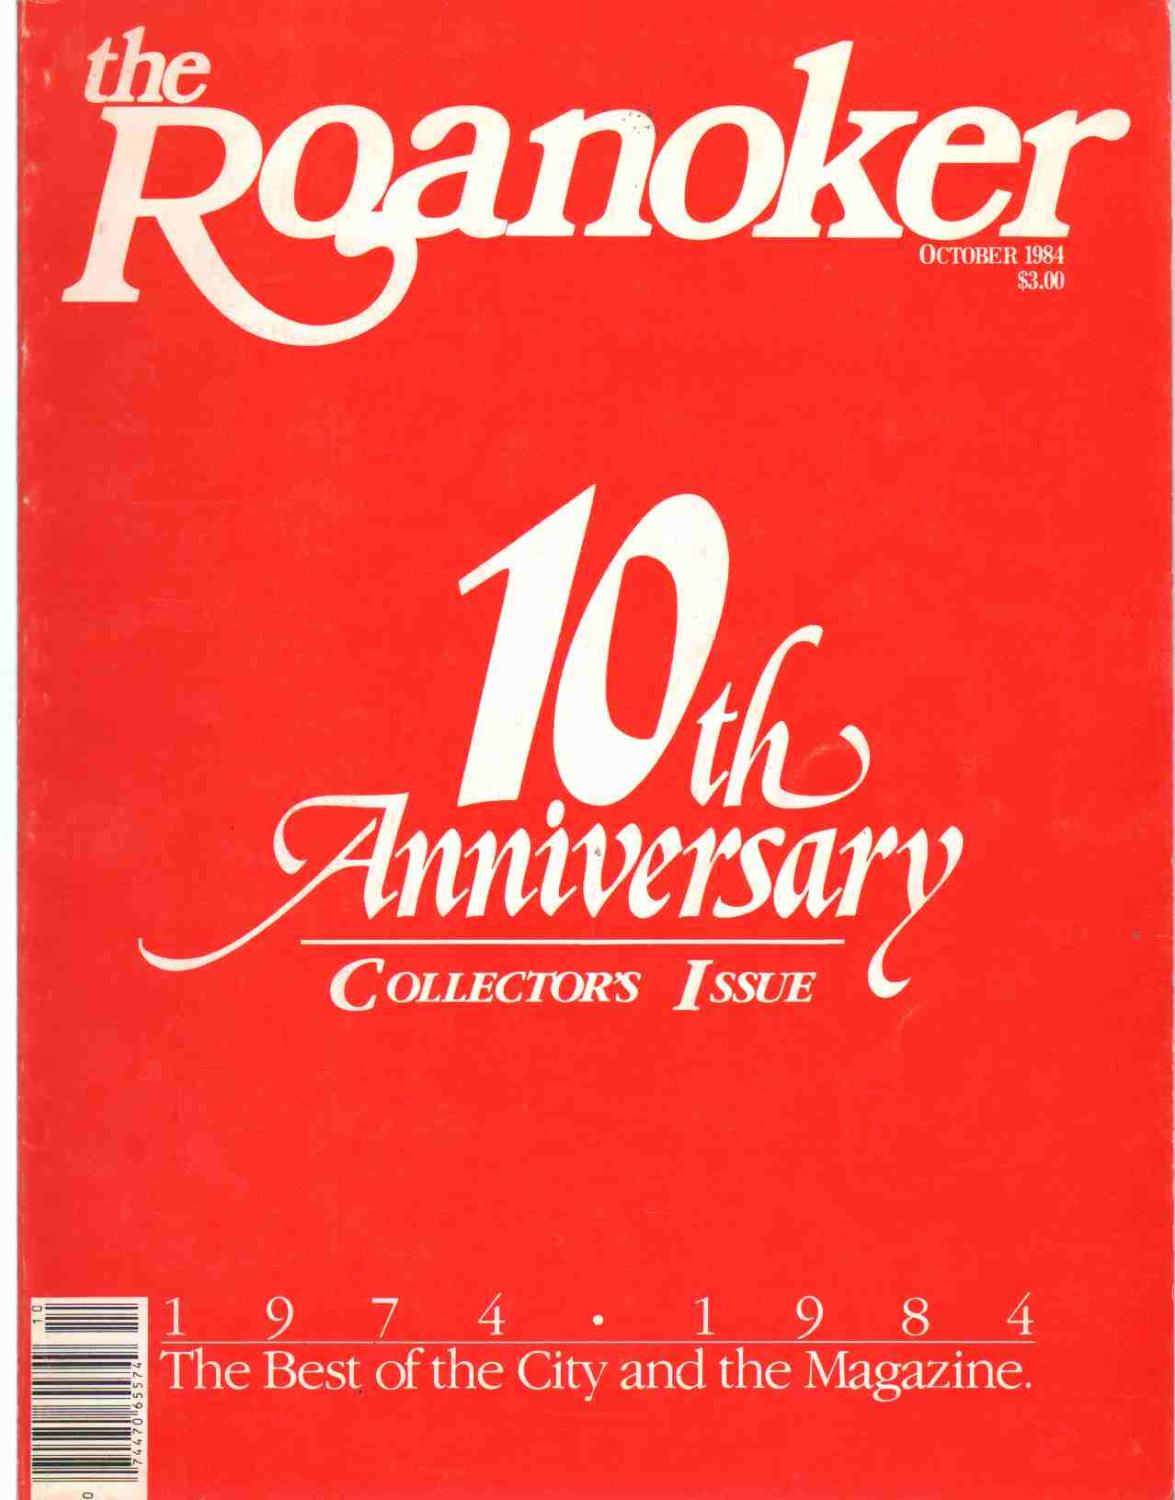 The Roanoker 10th Anniversary Collector S Issue October 1984 By Rheinheimer Kurt Editor 1984 Magazine Nbsp Nbsp Periodical The Avocado Pit